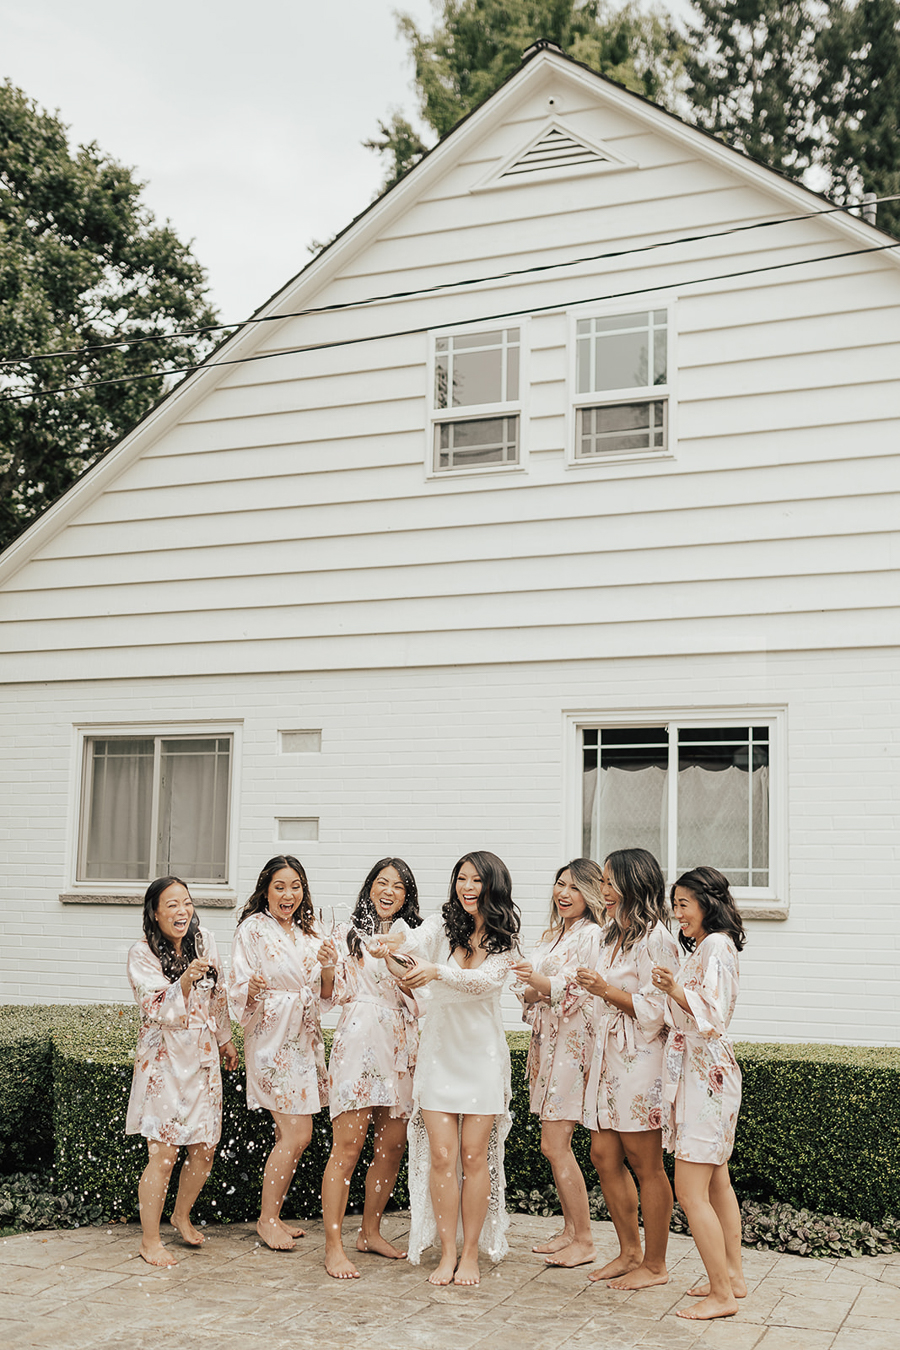 Fathom Gallery Bridal Shower in Washington DC for Bride-to-Be